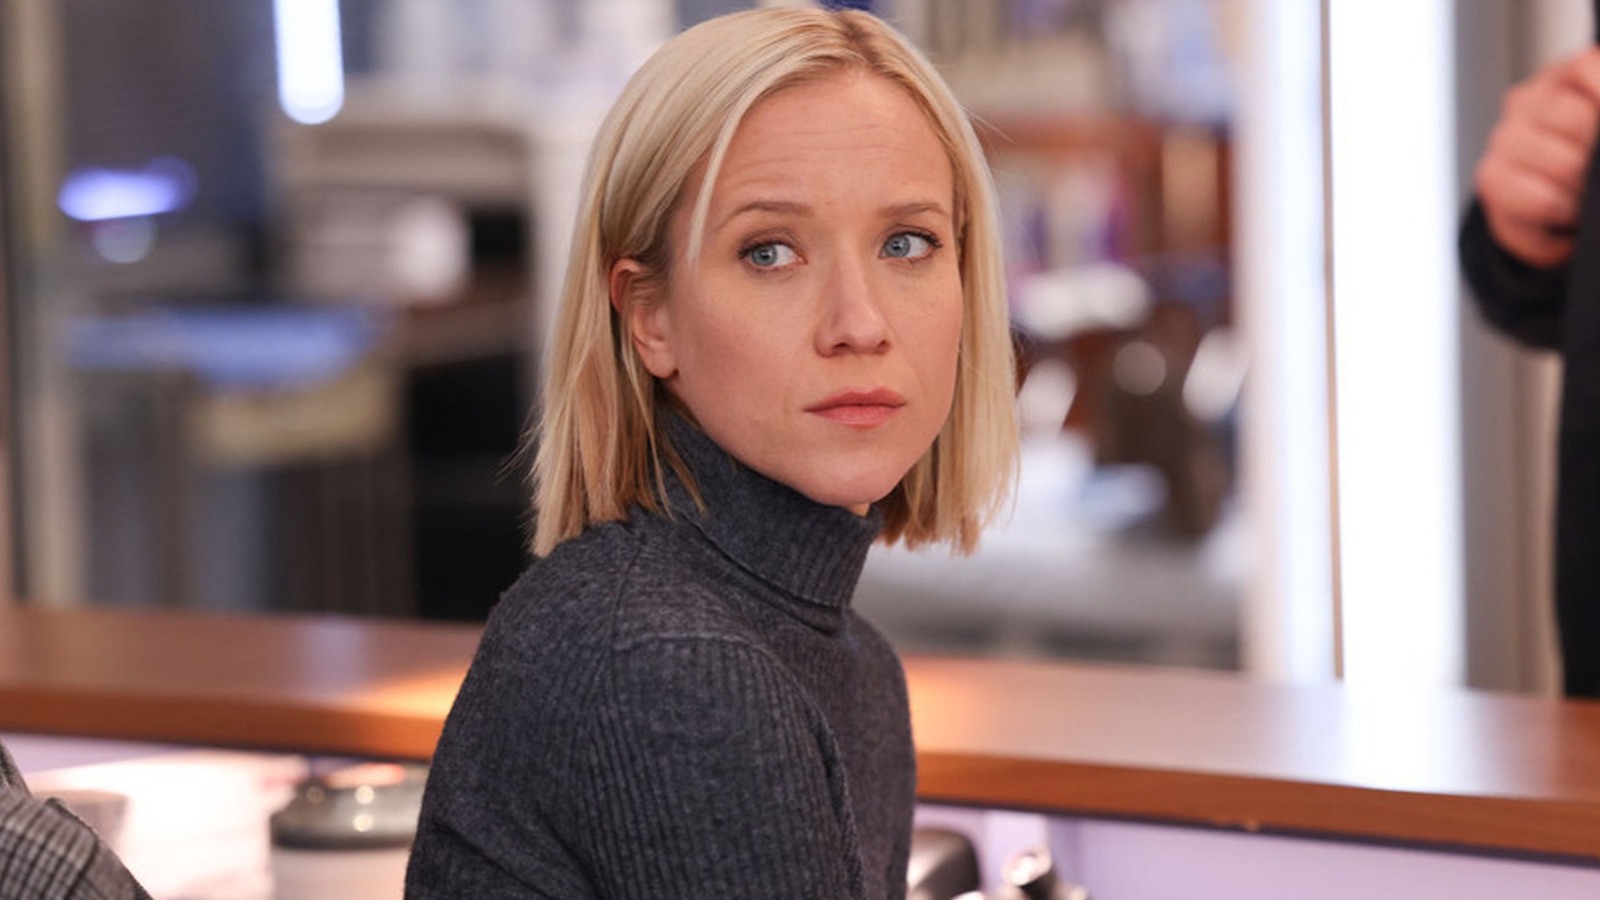 Why Did Jessy Schram Leave Chicago Med In Season 6 & What Led To Her Return?